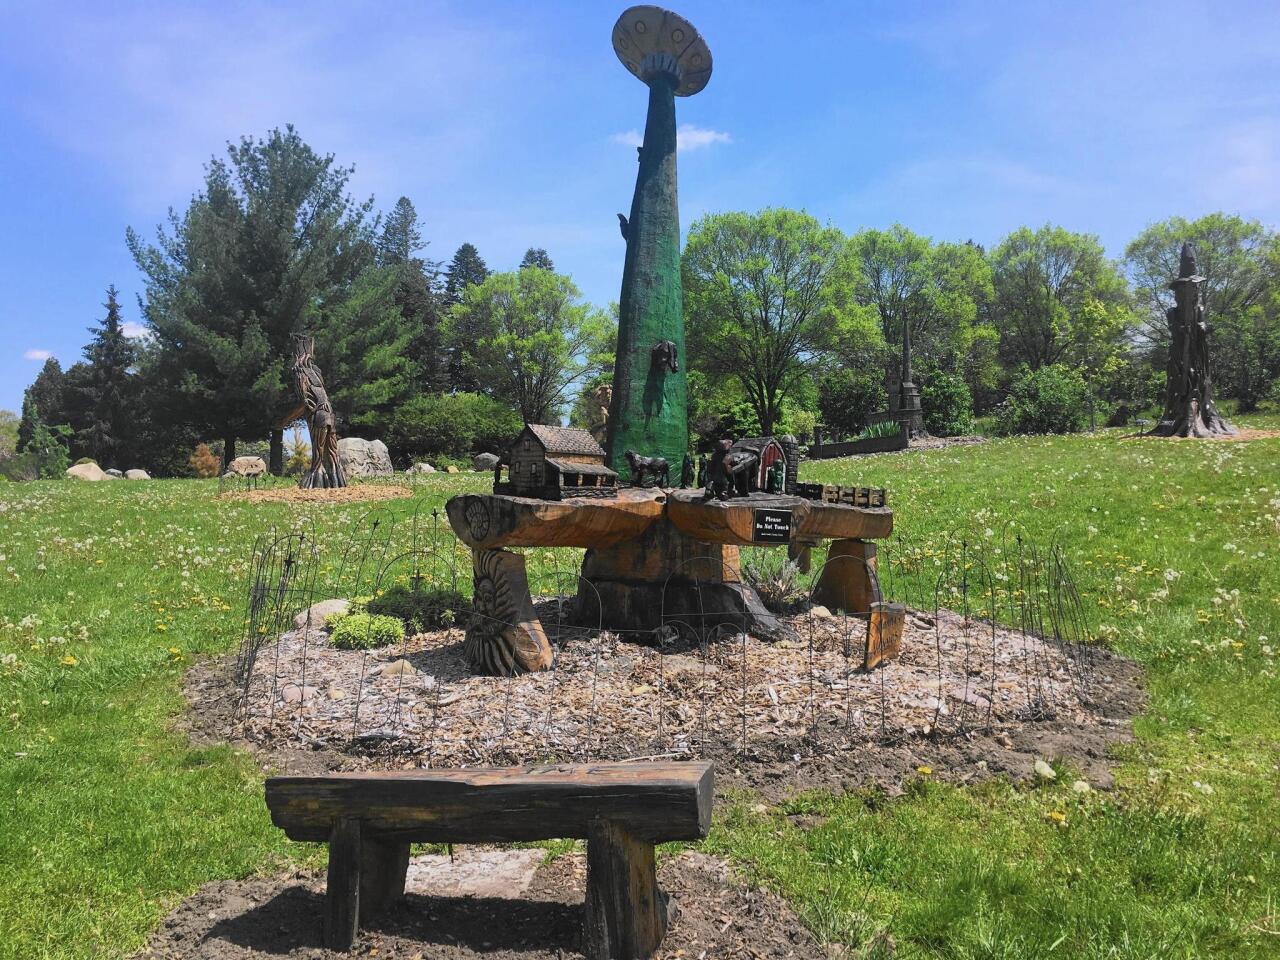 The Battle Creek Fantasy Forest at the Leila Arboretum is a park with sculptures carved from trees killed by the emerald ash borer. This one, by Mike Ayers, is titled “The Strange Disappearance of Old MacDonald.”